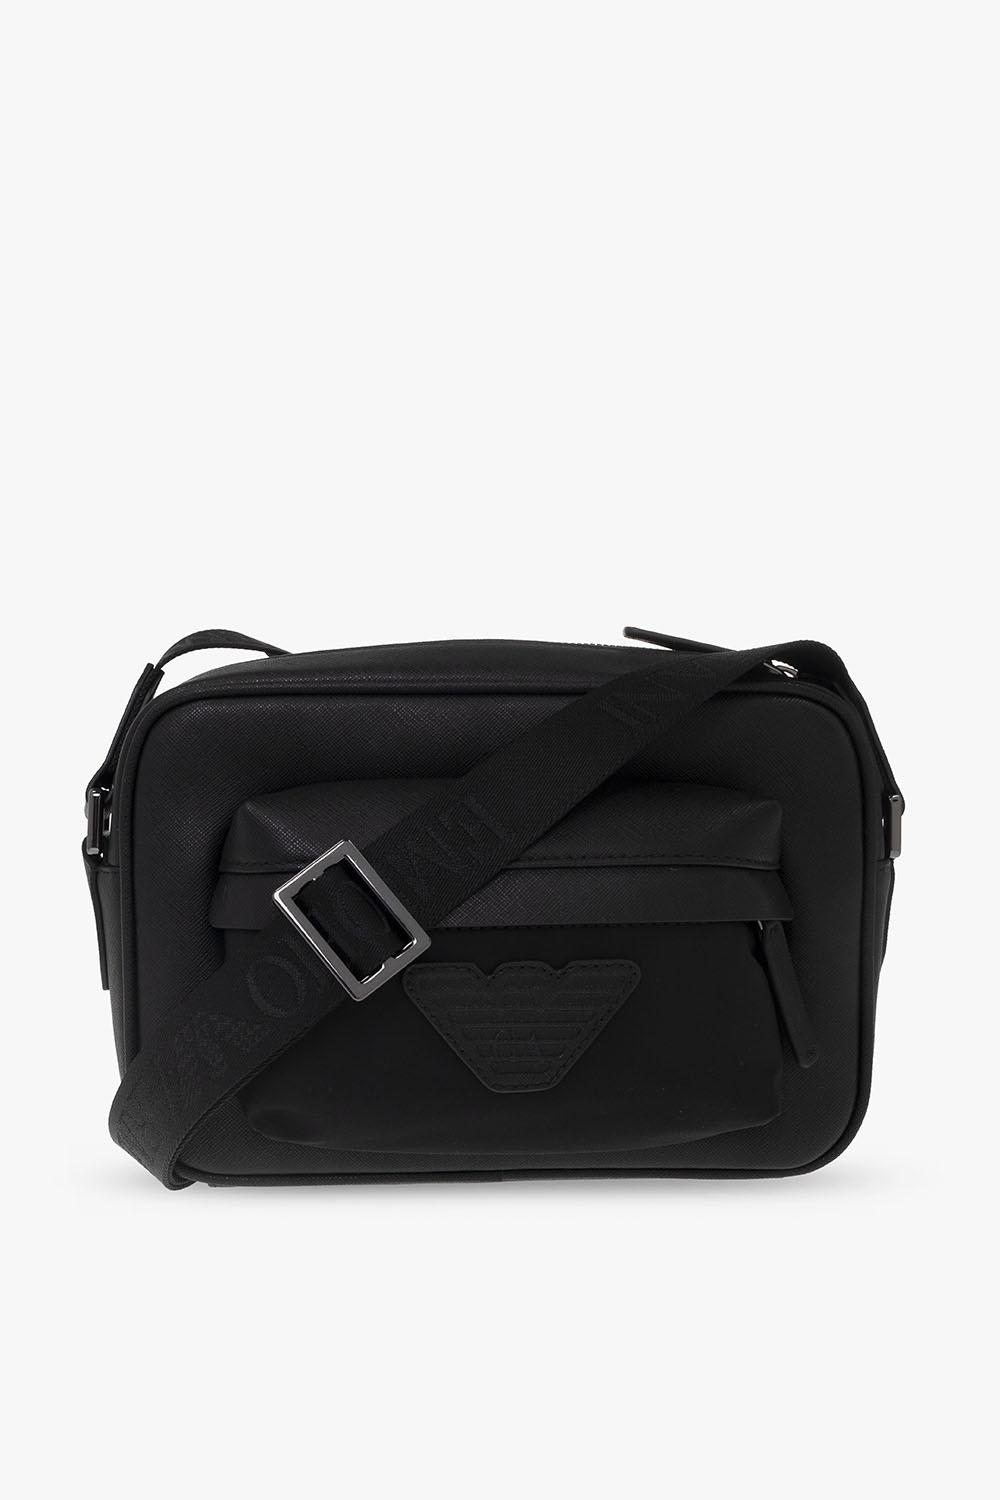 Emporio Armani Shoulder Bag From The Sustainable Collection In Nero